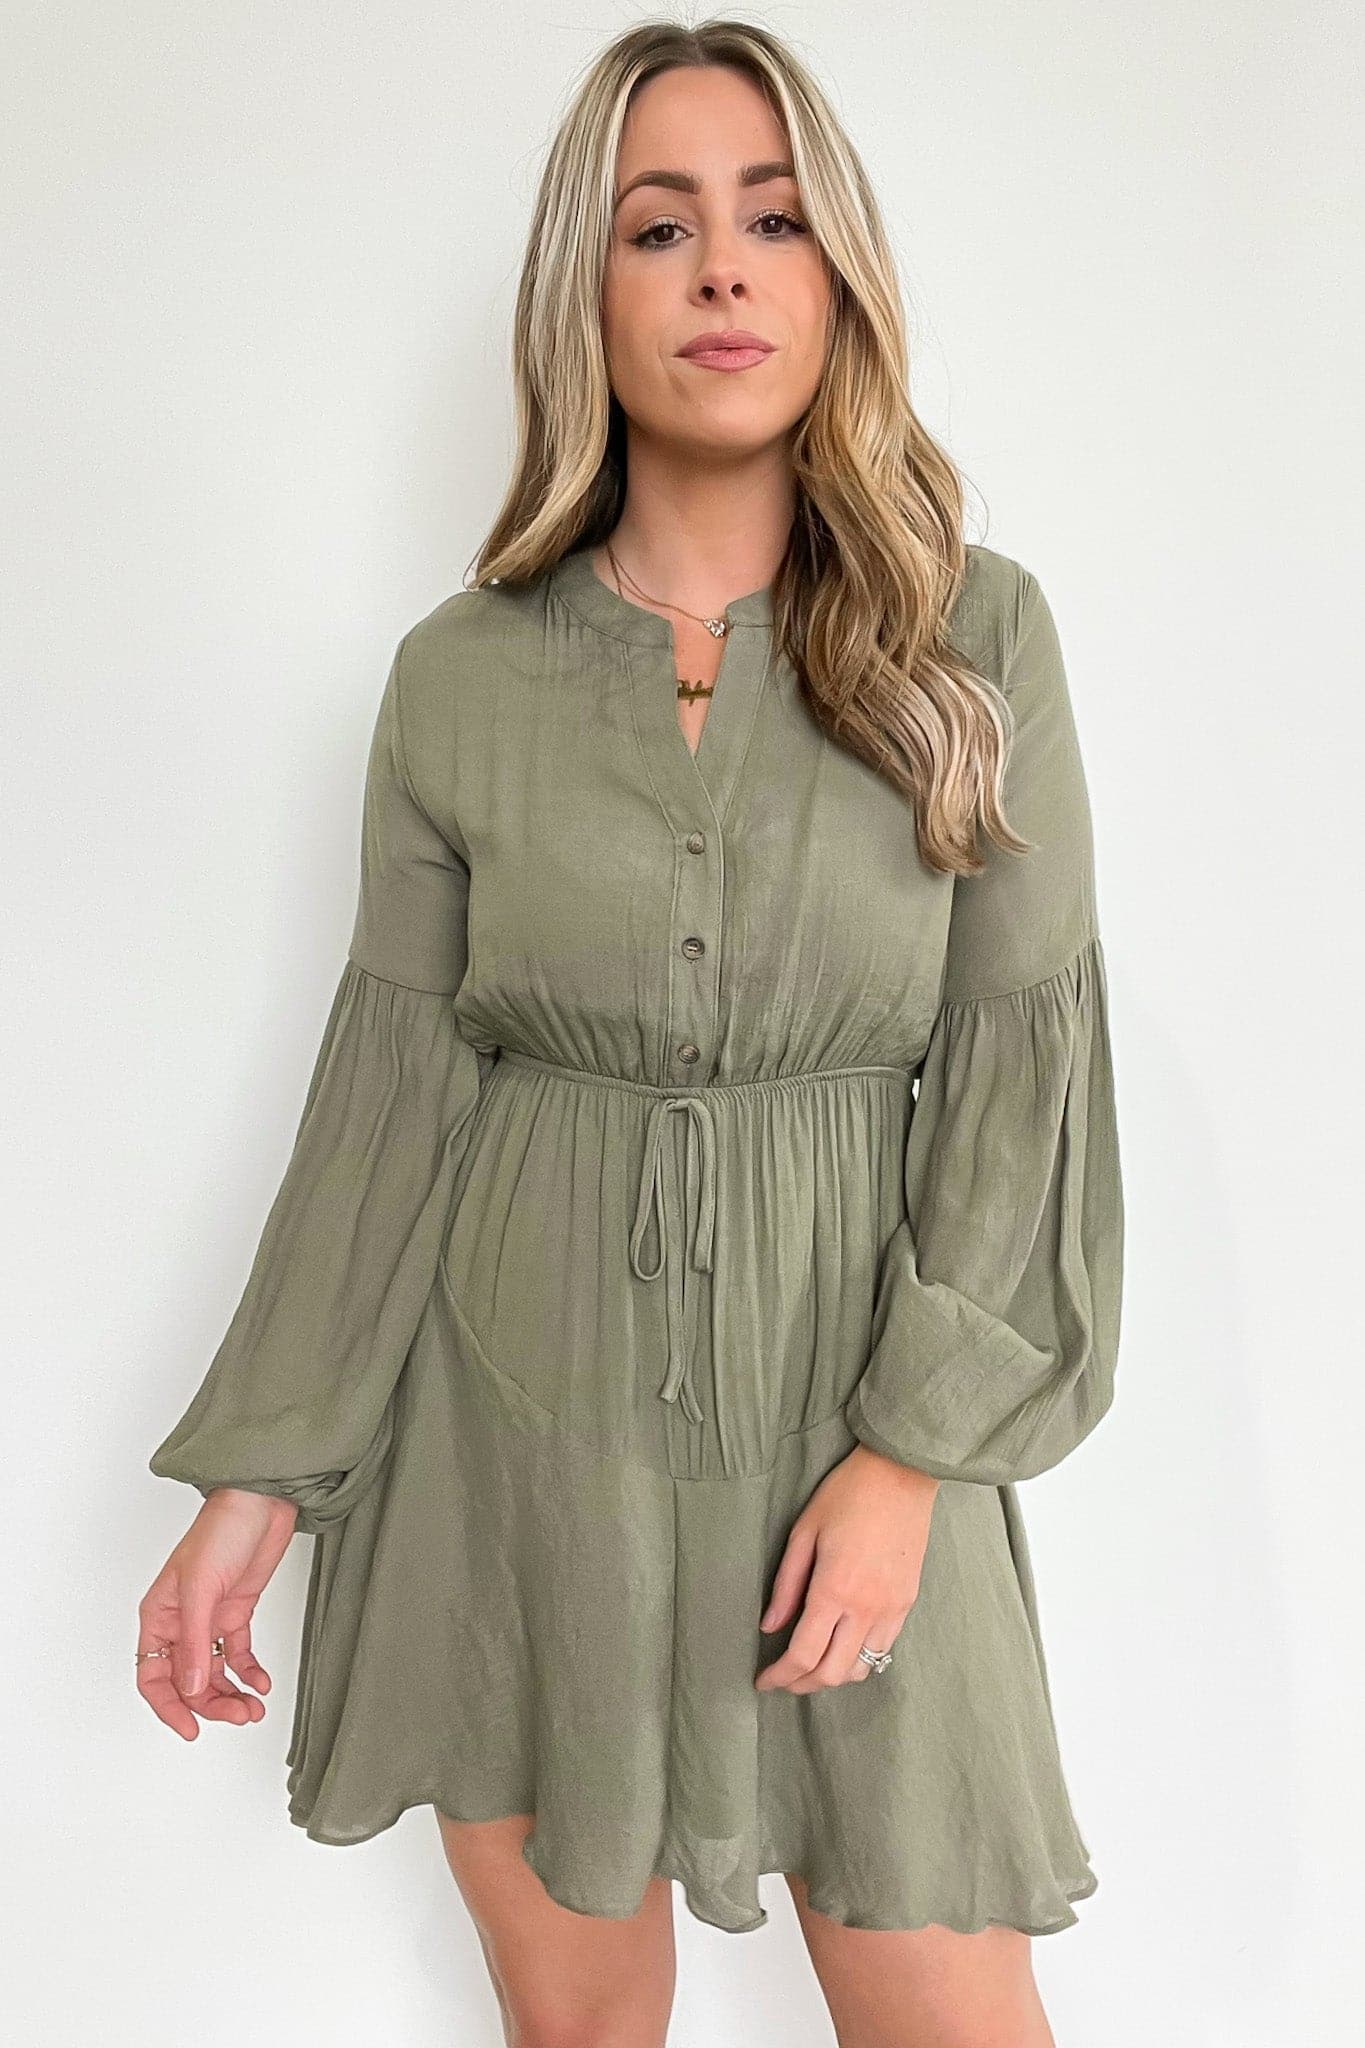  Everly Mine Button Down Flowy Dress - FINAL SALE - Madison and Mallory